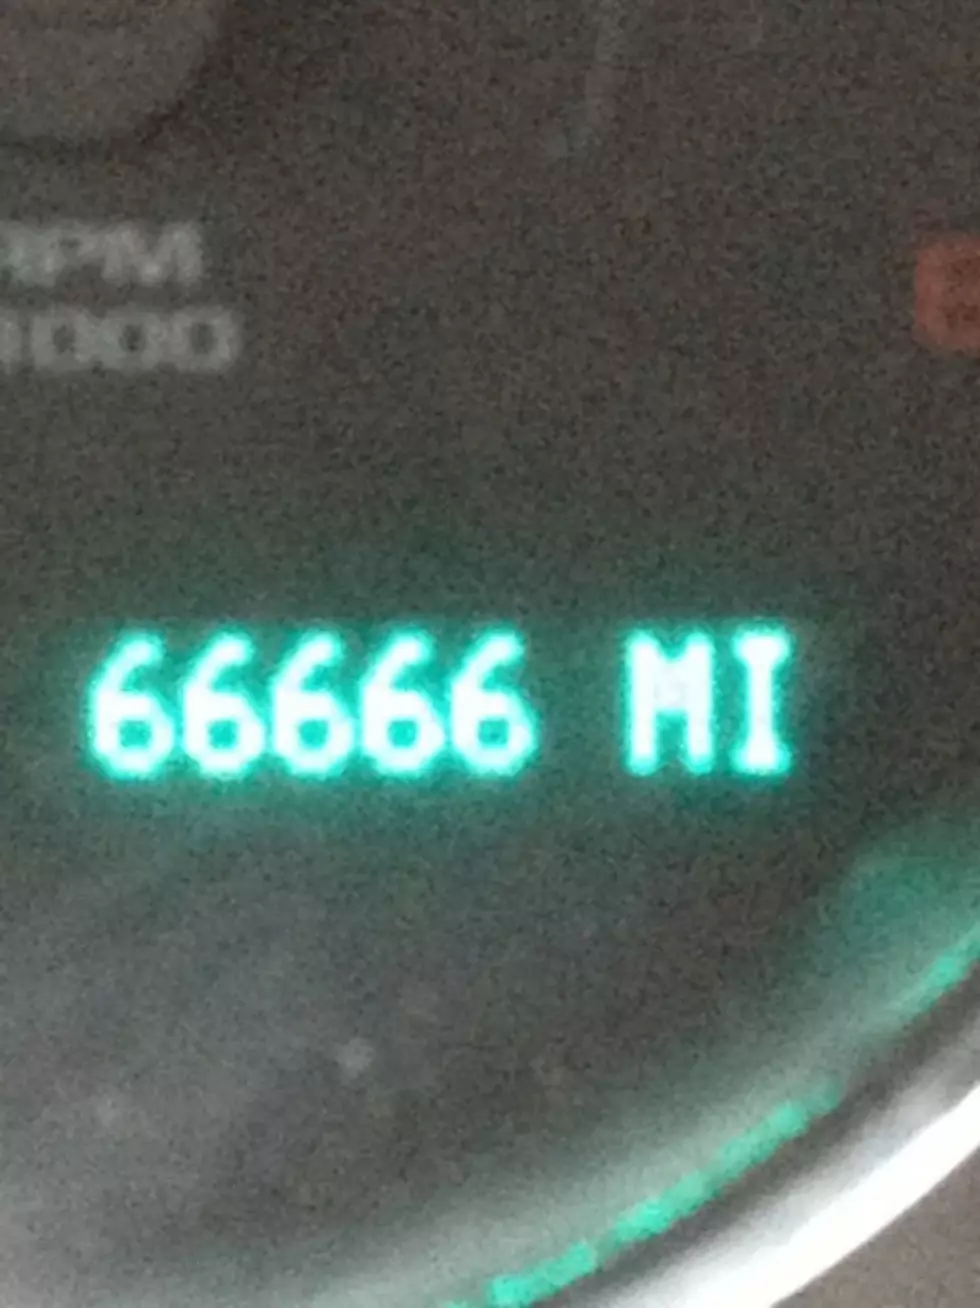 66666 May Not Be the Number of the Beast, But it is the Number on My Odometer